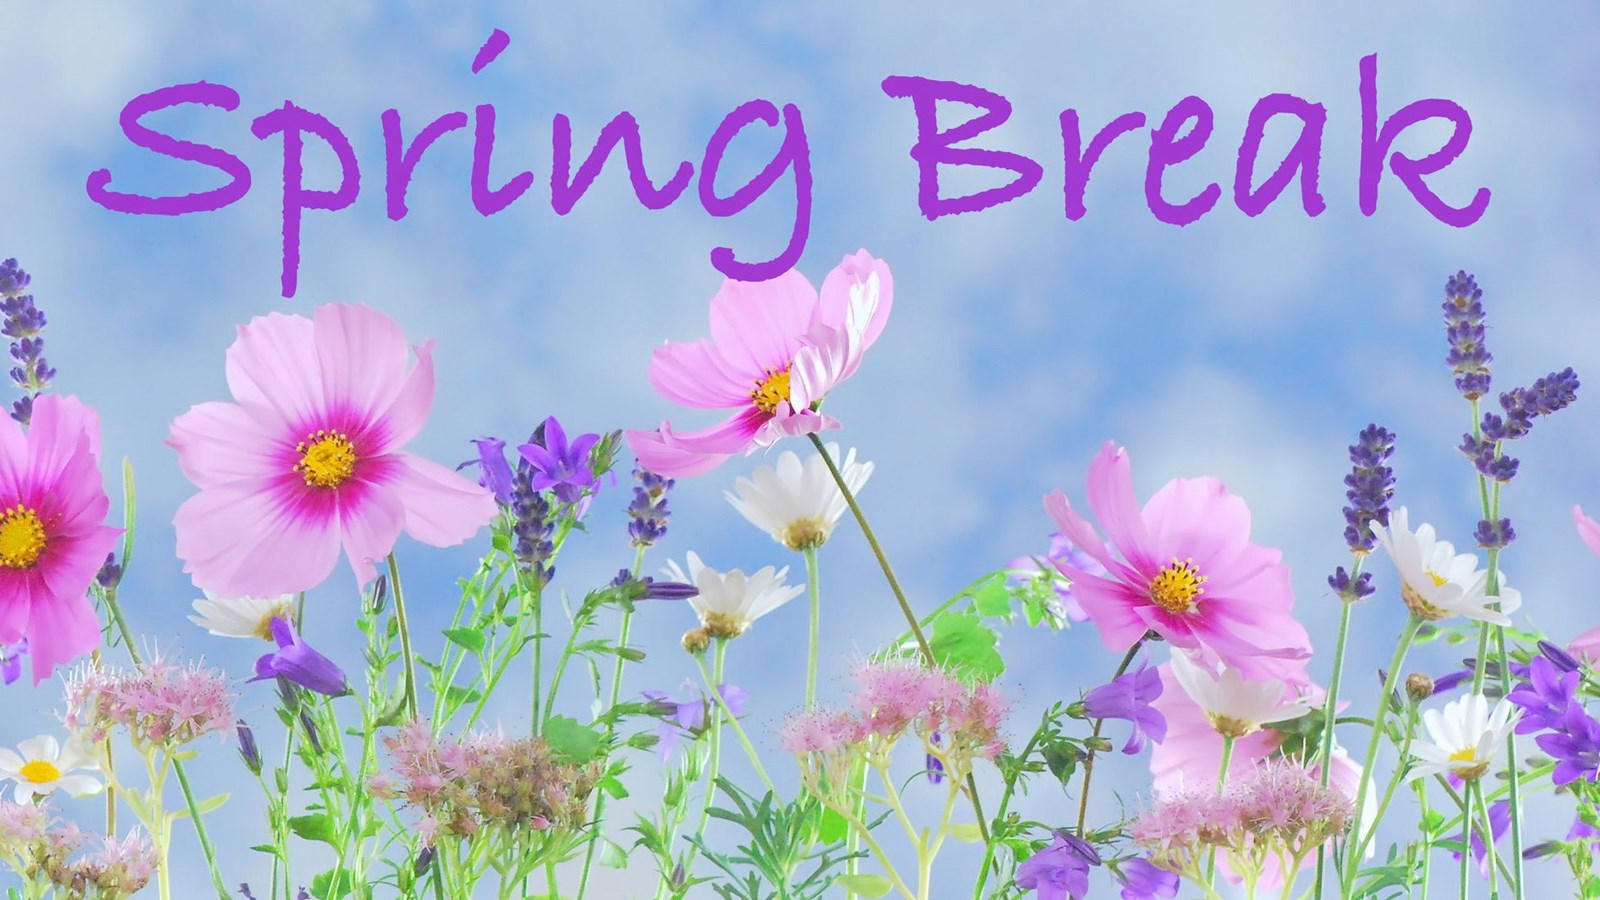 Spring Break in purple letters with pink, purple and white flowers against a blue sky